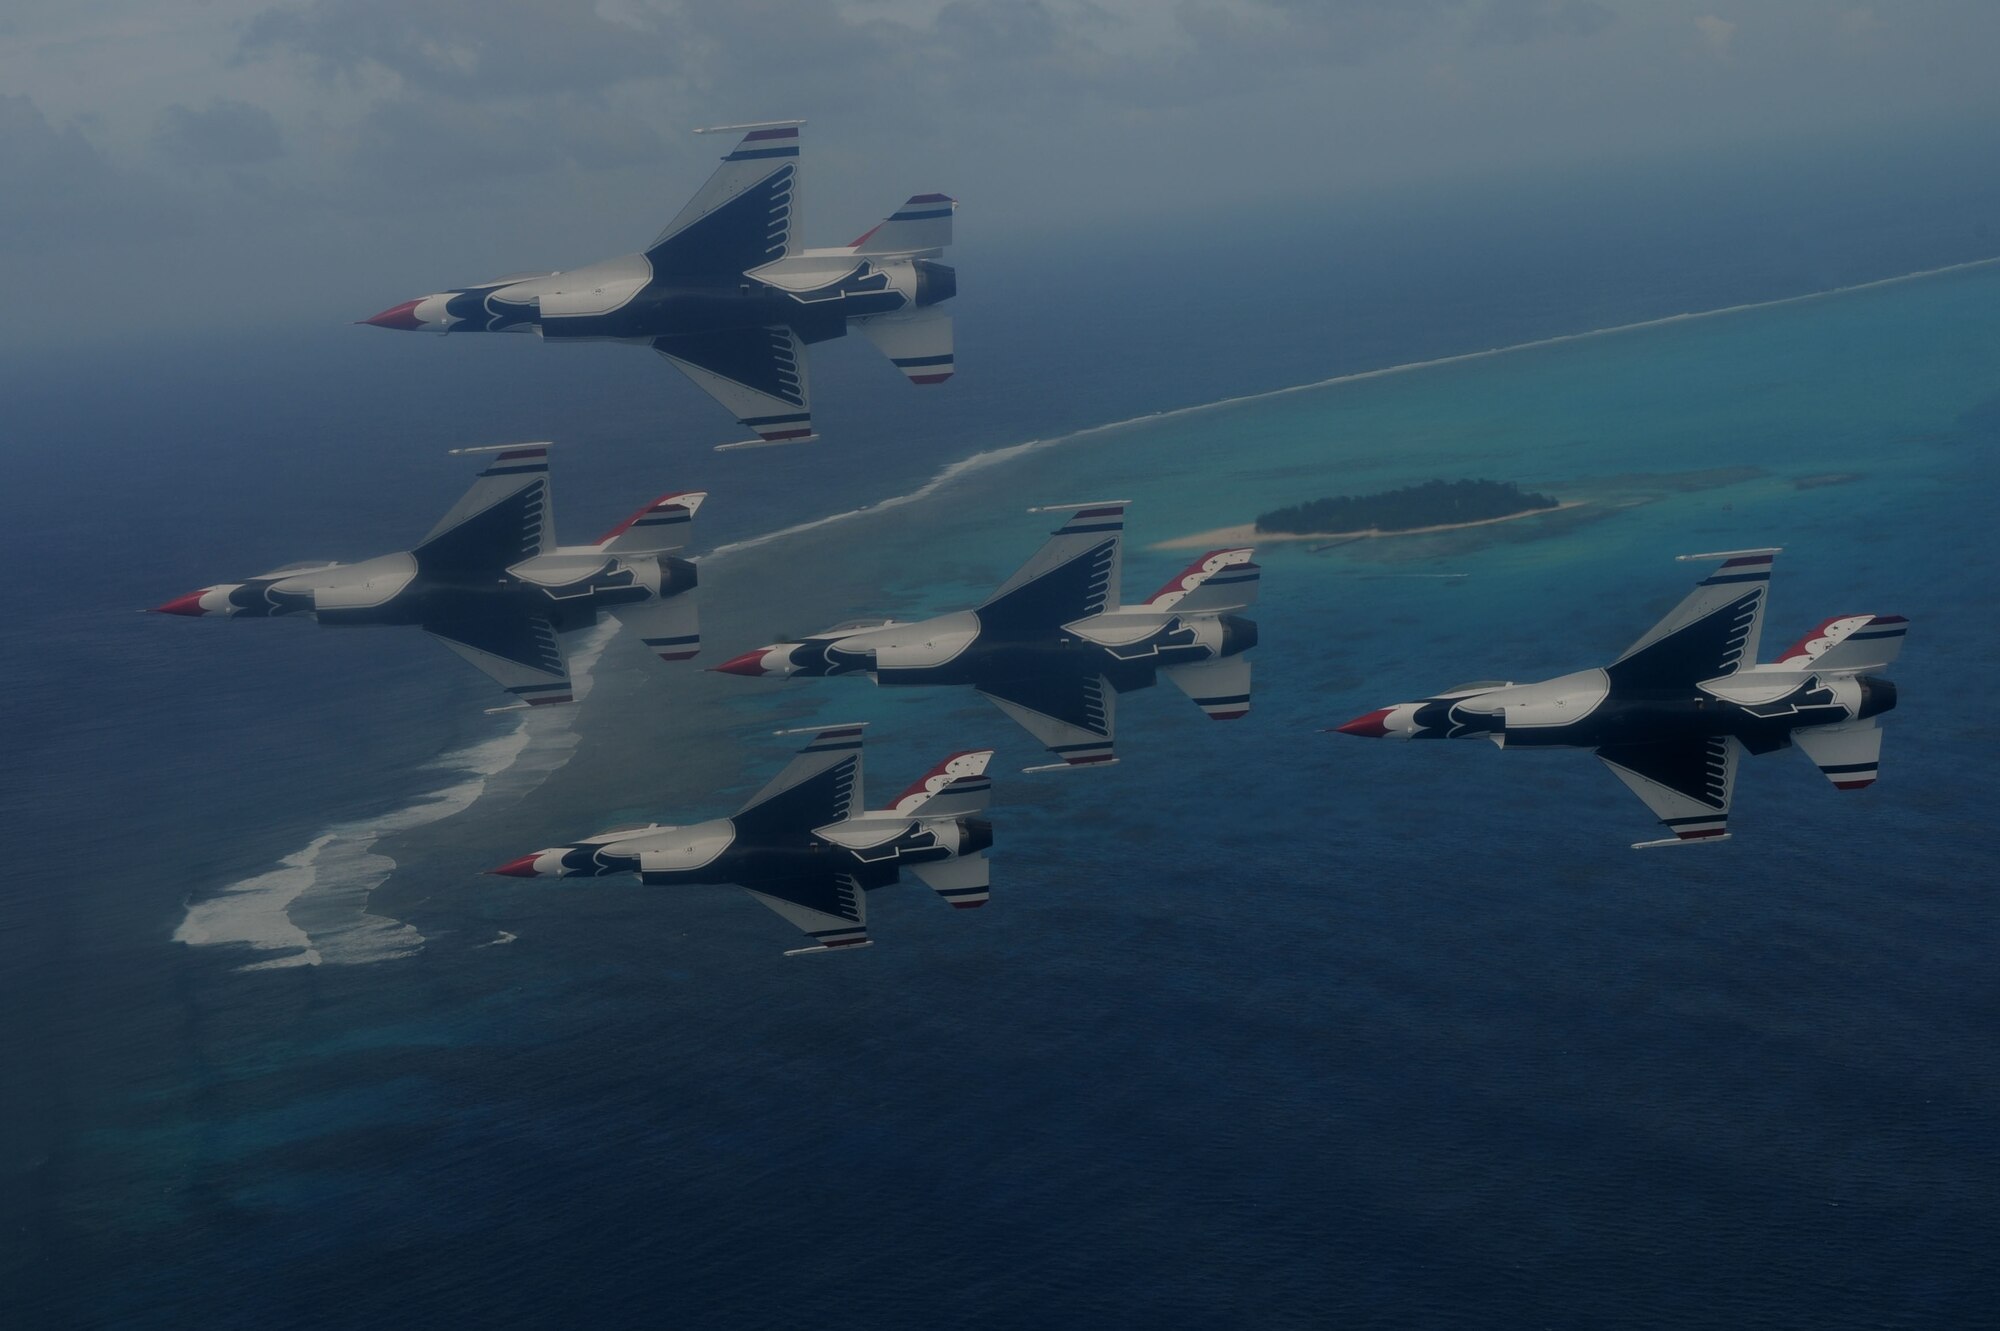 The U.S. Air Force Thunderbirds fly in formation on their way to Saipan Oct. 6.  The Thunderbirds flew over Saipan before conducting their practice demonstration over Andersen Air Force Base, Guam.  The Thunderbirds are visiting Andersen AFB for the Team Andersen Air Show '09 on Oct. 7.  (Air Force photo by Staff Sgt. Kristi Machado)